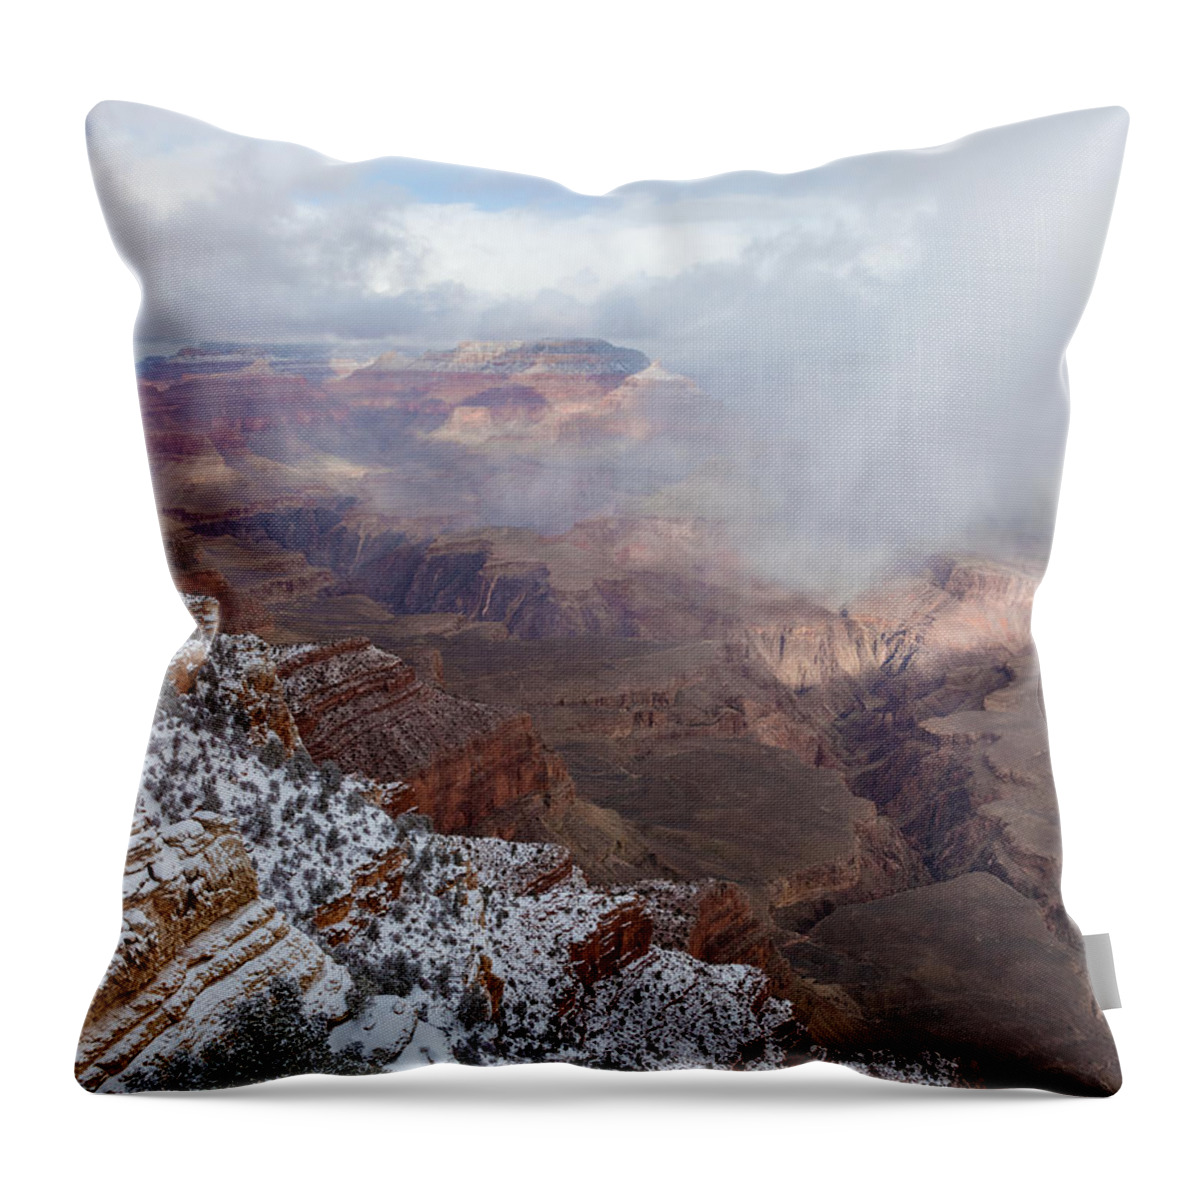 Landscape Throw Pillow featuring the photograph the Grand Canyon Overlook 3 by Jonathan Nguyen